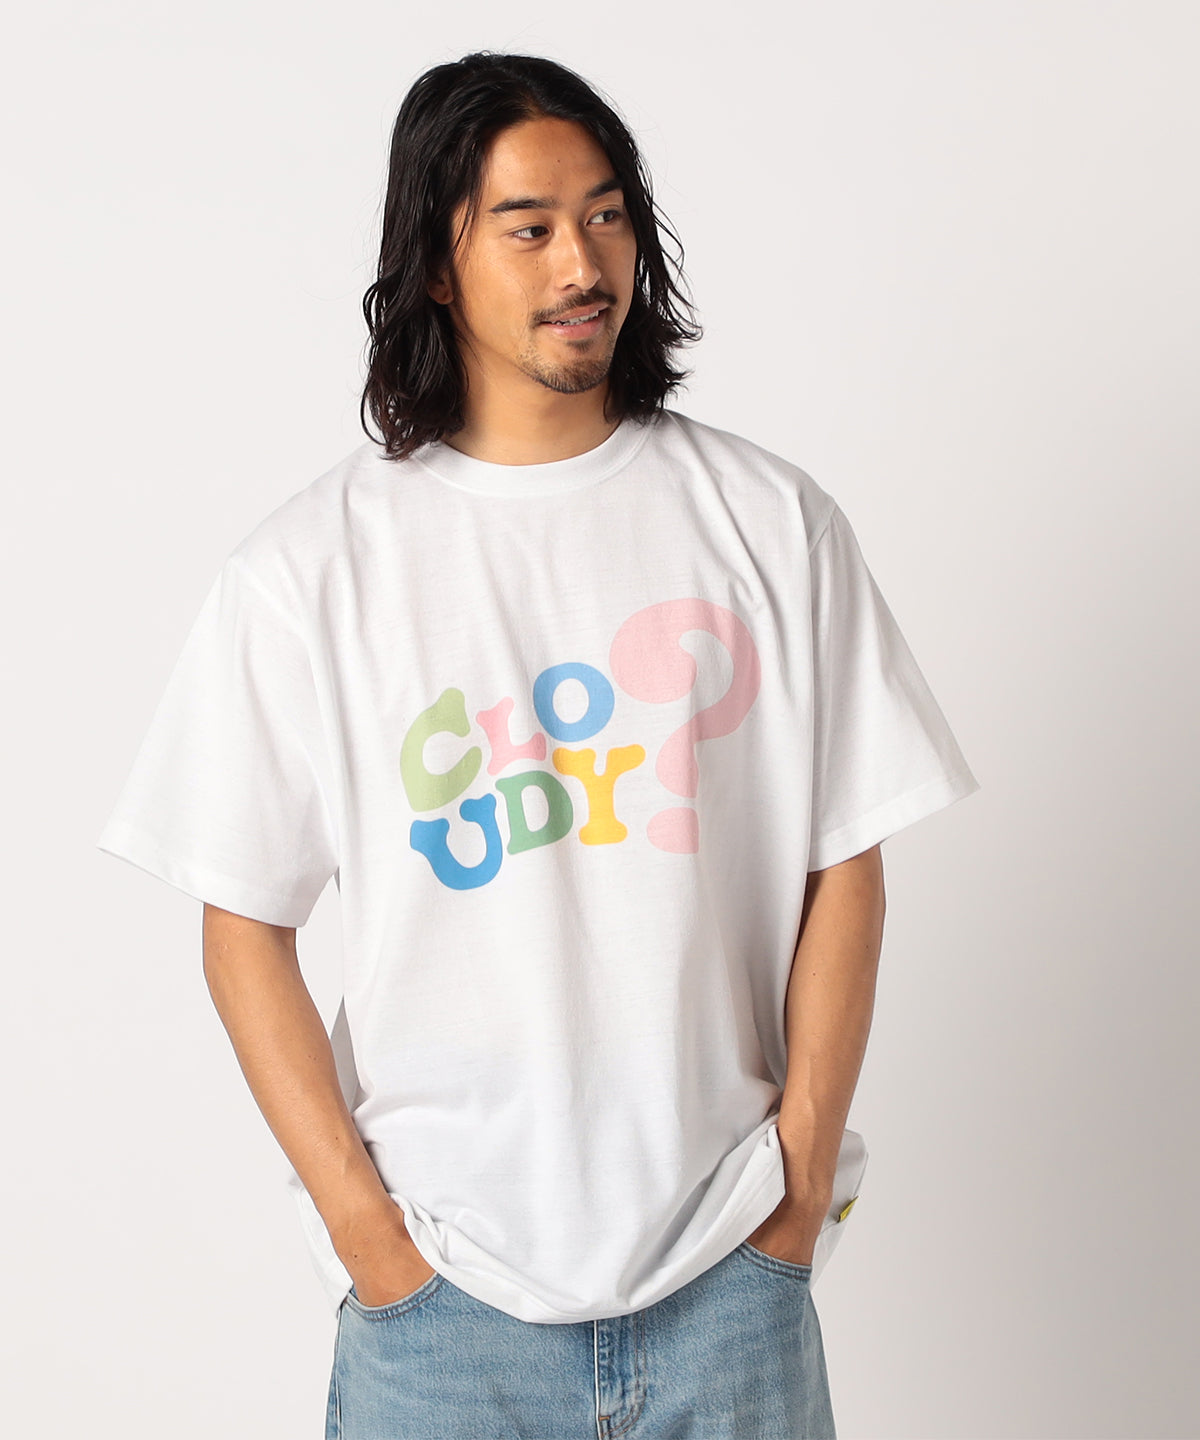 Lunch T-shirt CLOUDY ?   WHITE